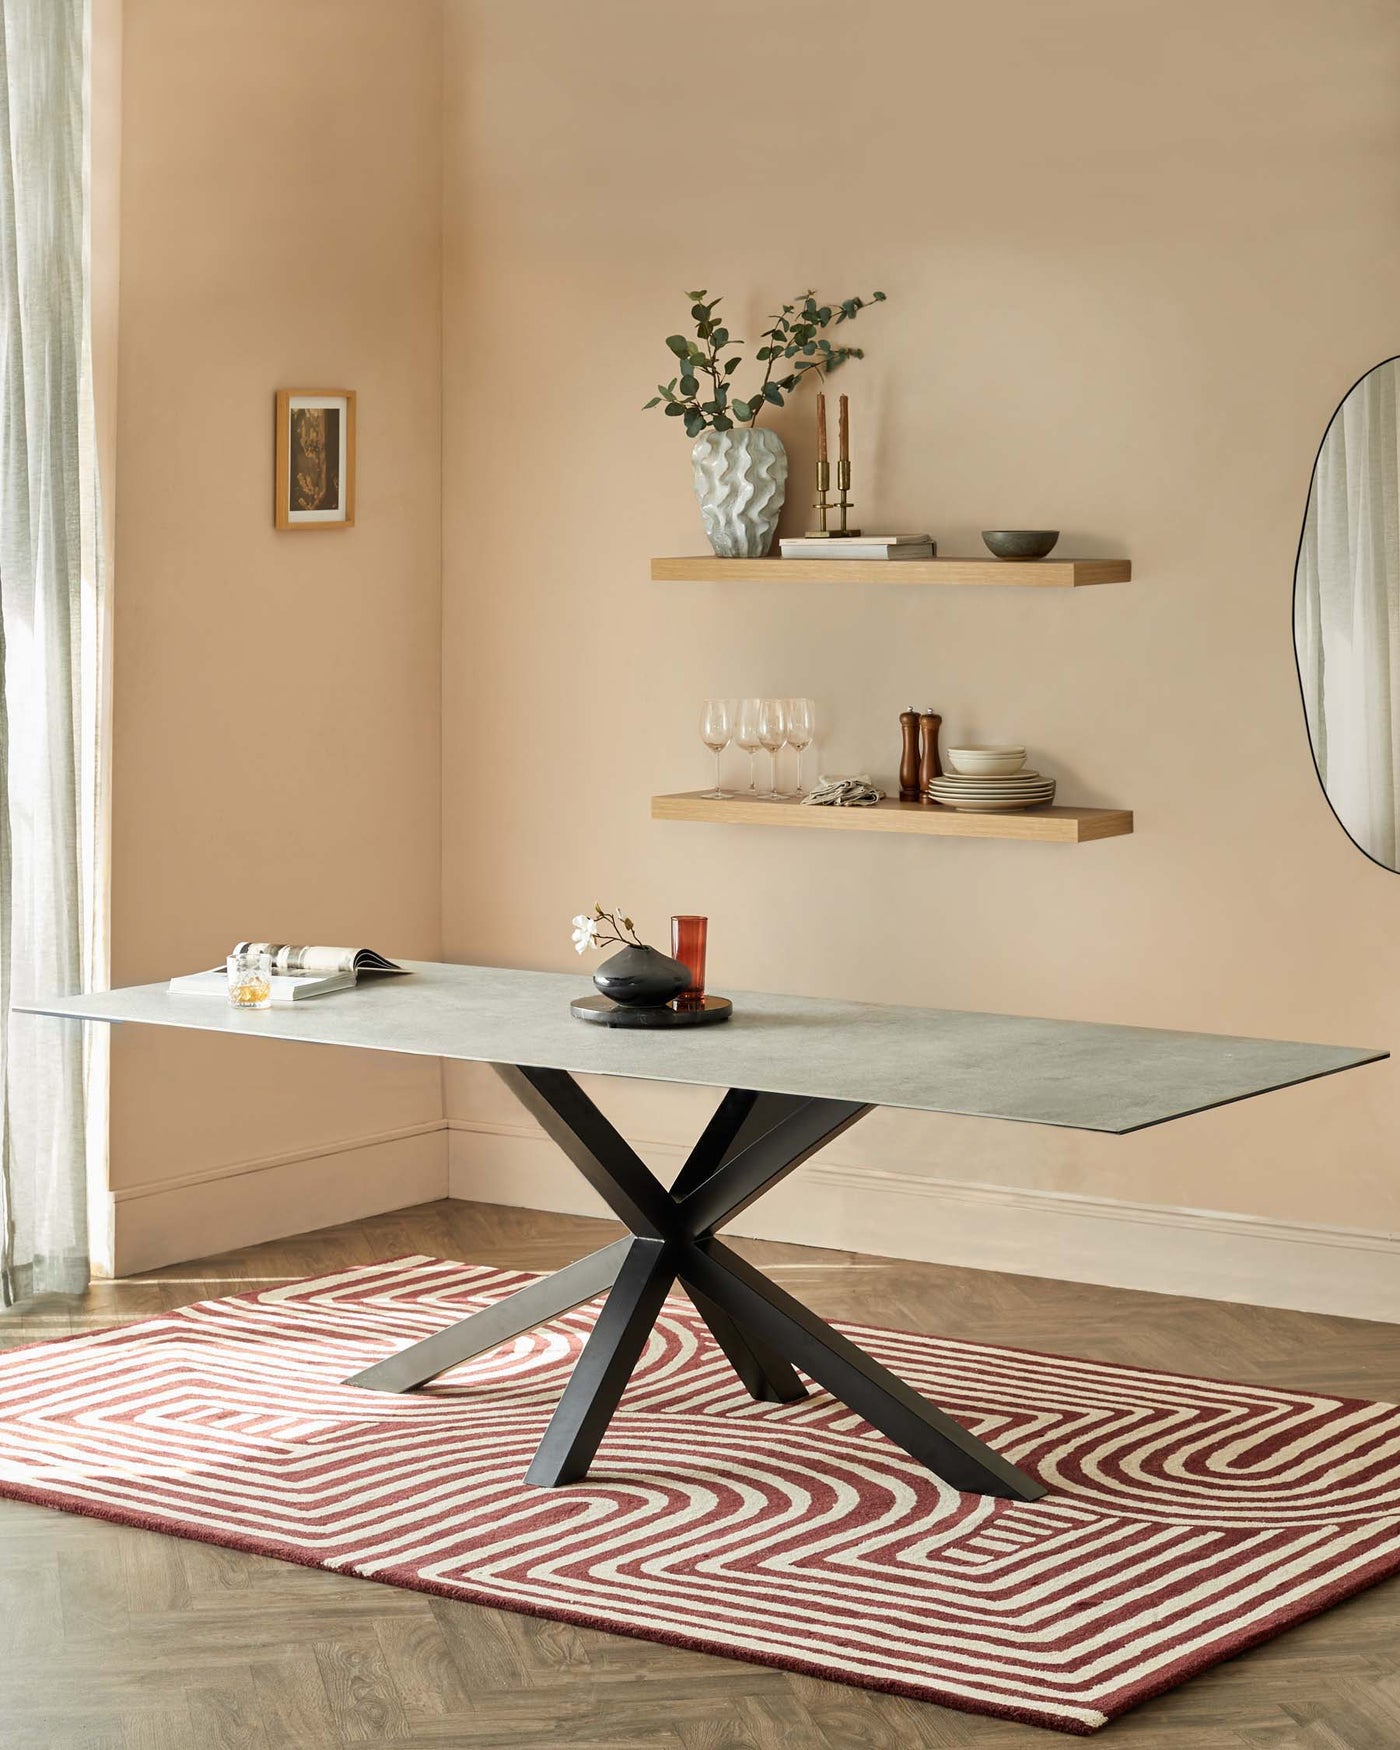 A modern rectangular dining table with a smooth grey surface and a geometric black base, accompanied by two floating wooden shelves on the wall above with decorative items, set against a warm peach-coloured wall background, and positioned on a red and white patterned area rug.